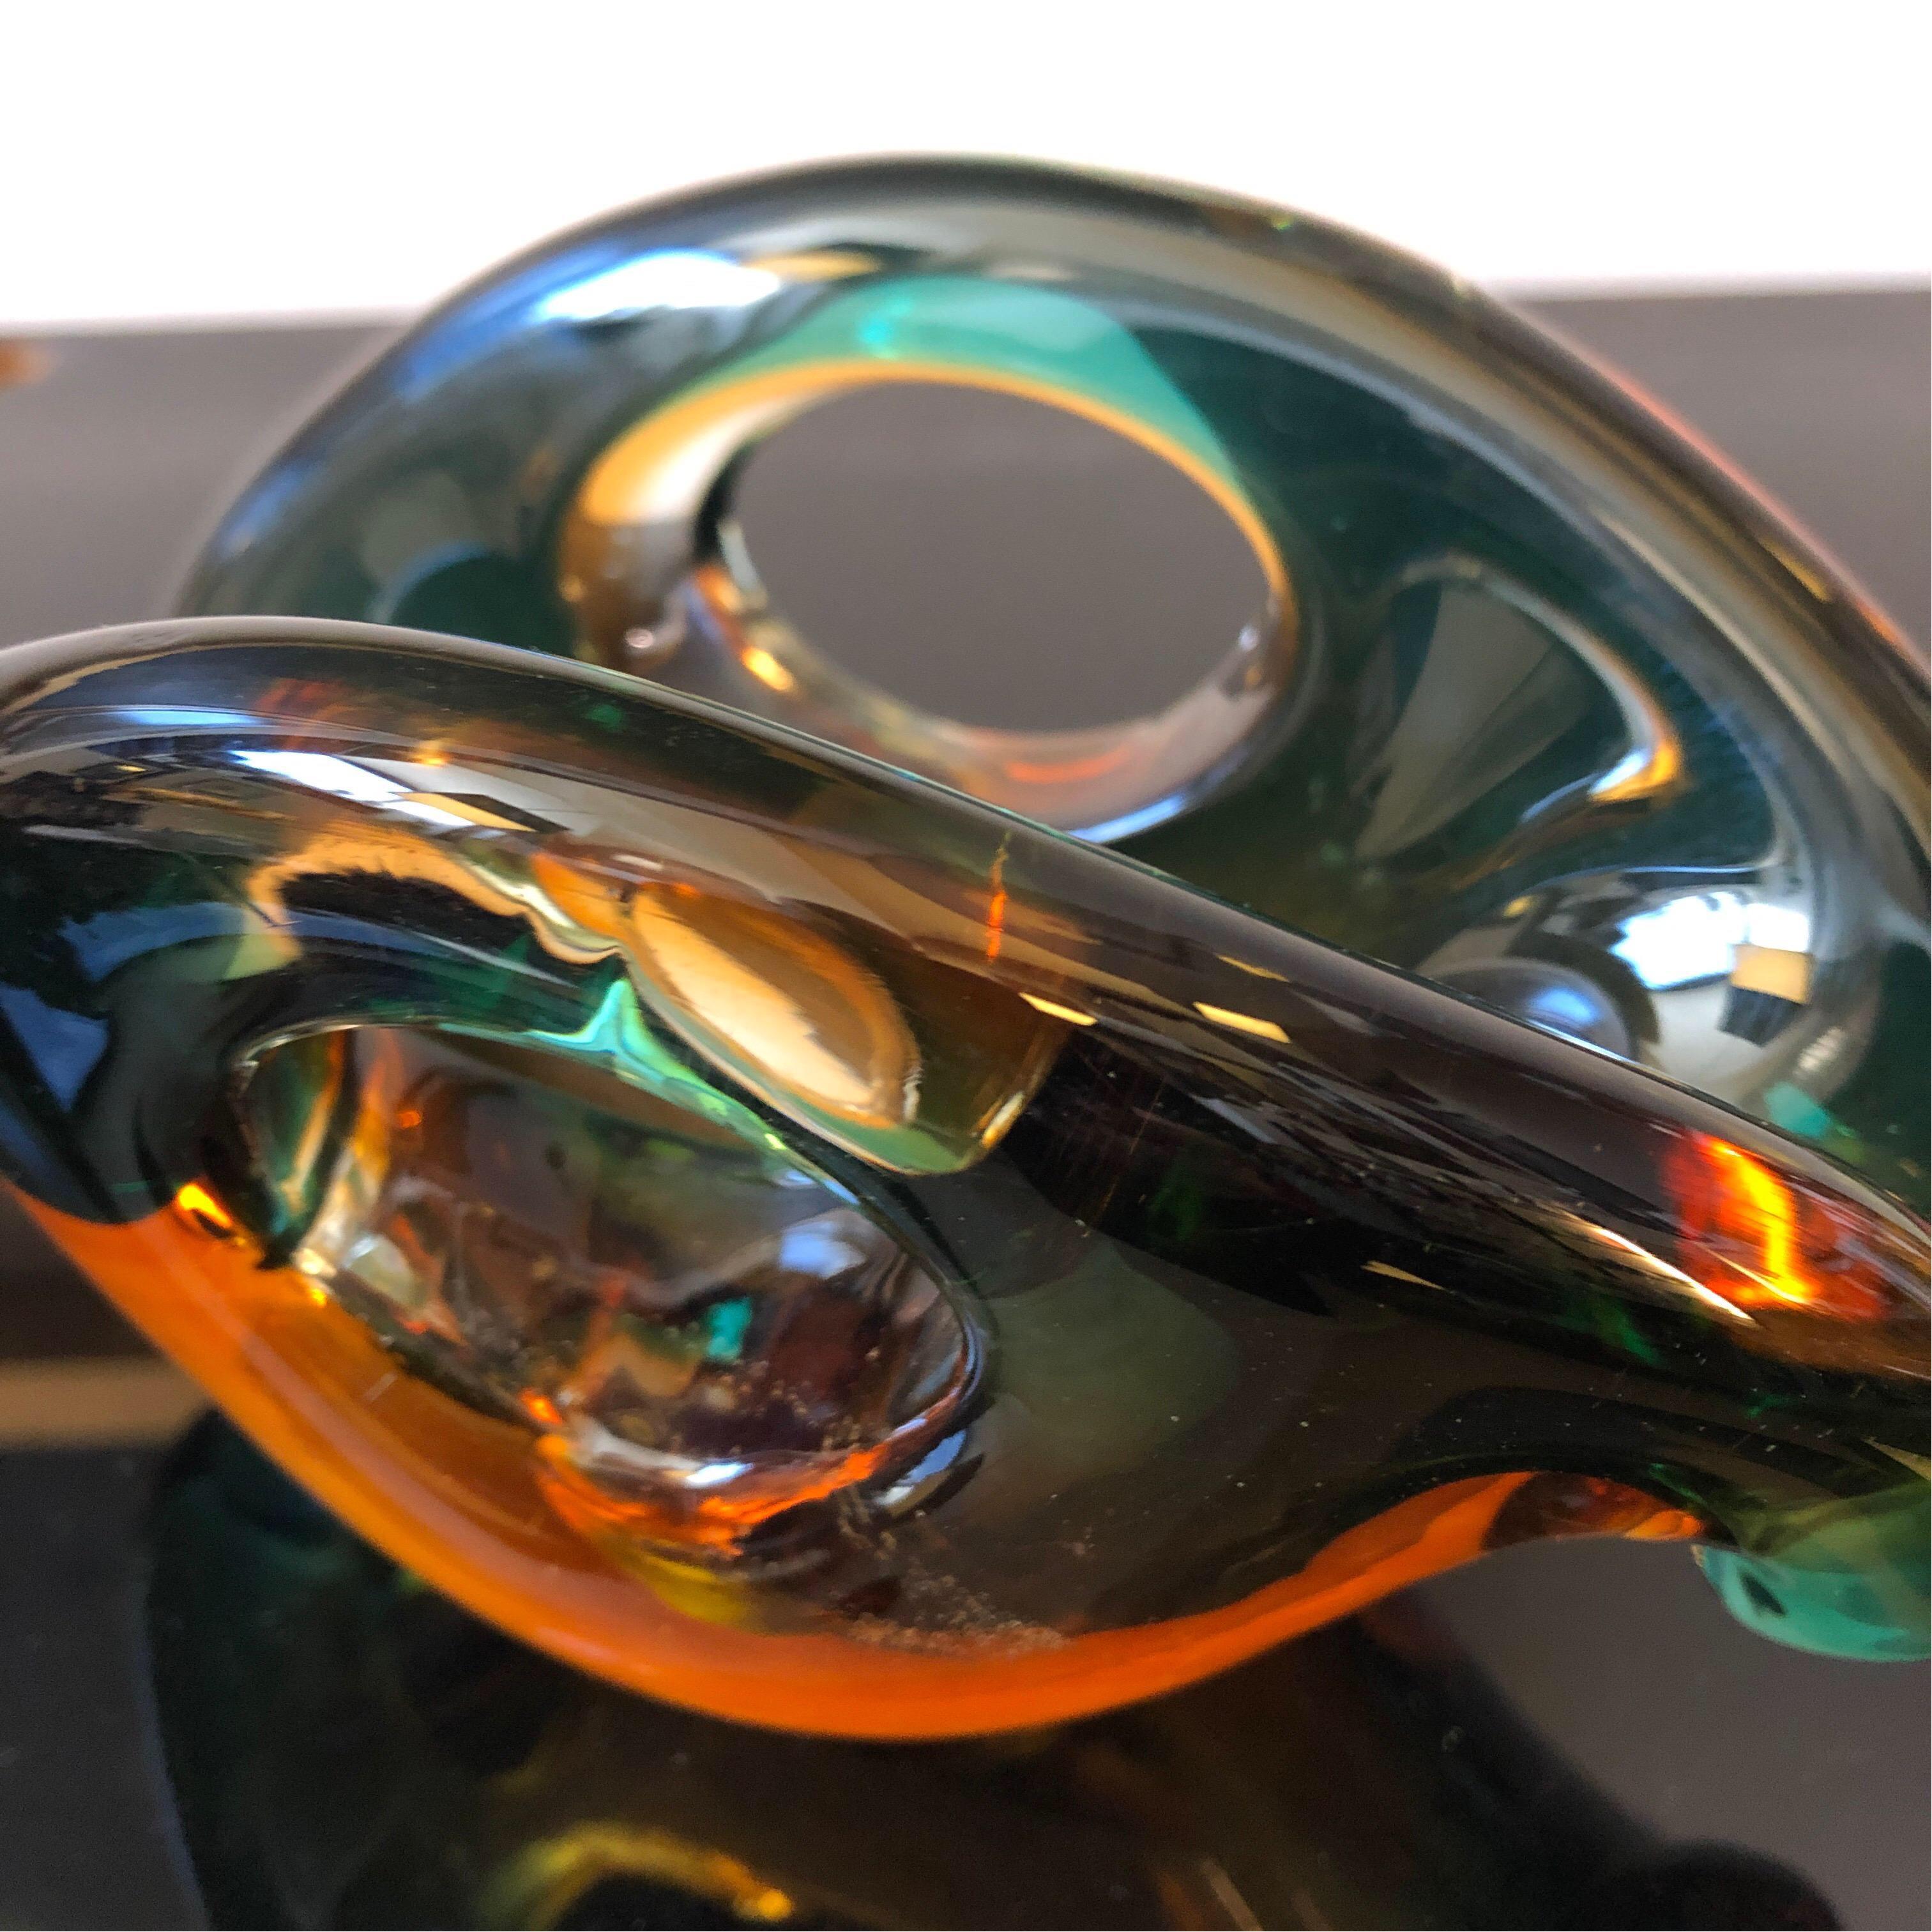 A green and brown sommerso Murano glass bowl made in Italy in the Seventies, signed A. Seguso Murano on the bottom.